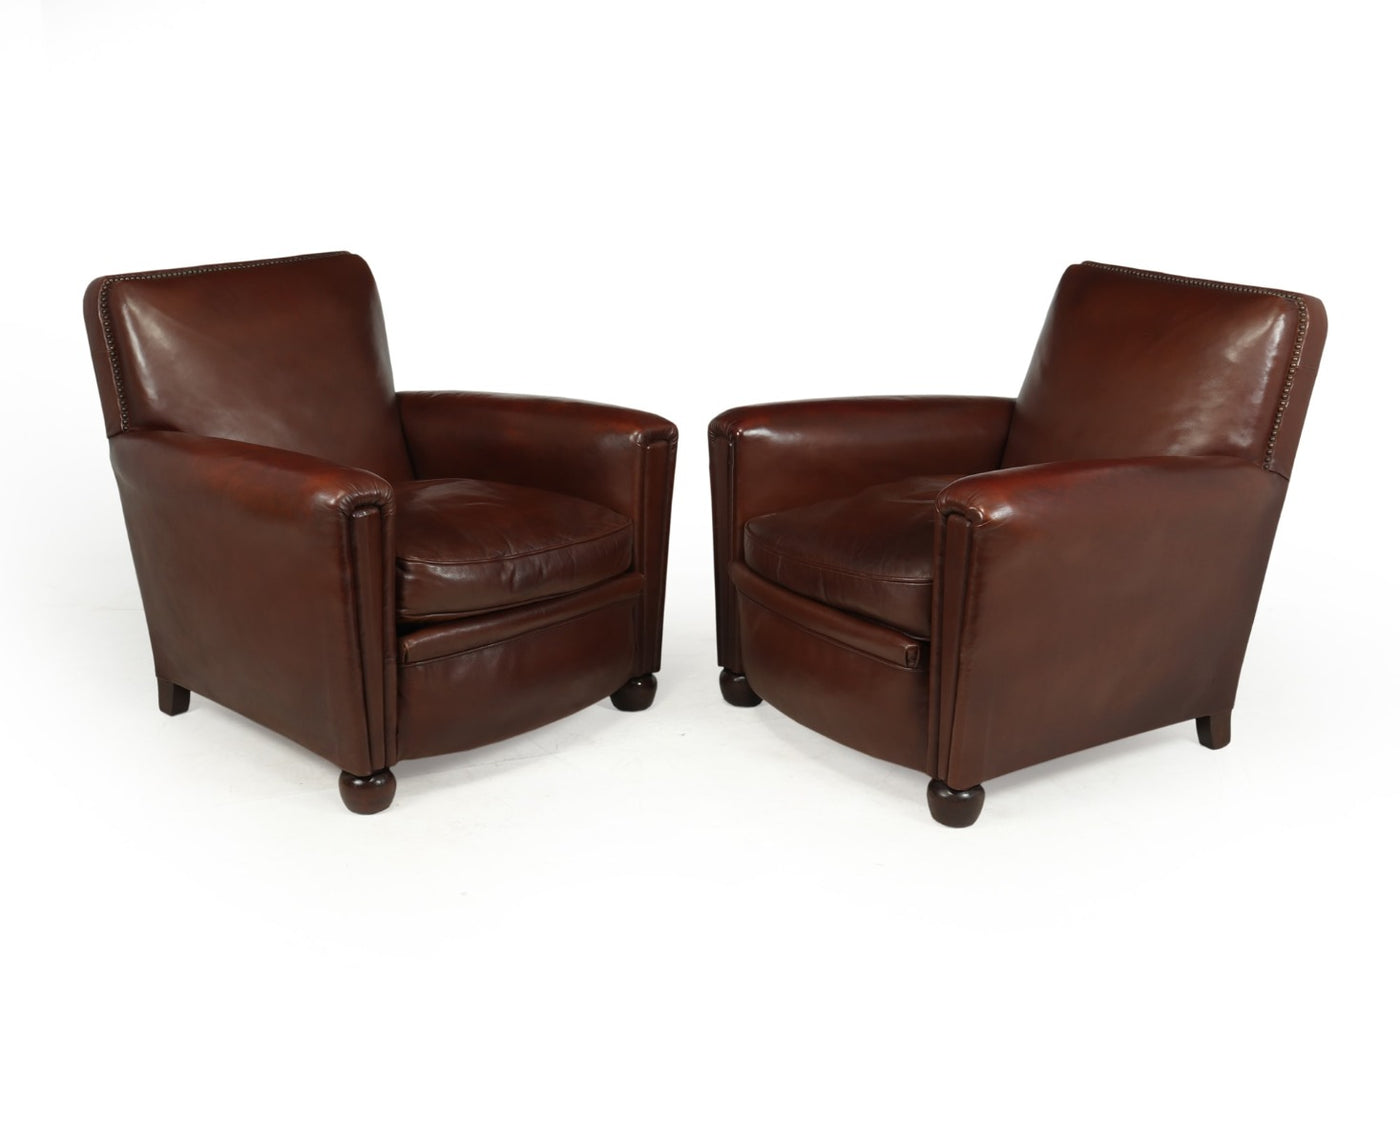 Pair of French Leather Club Chairs c1941